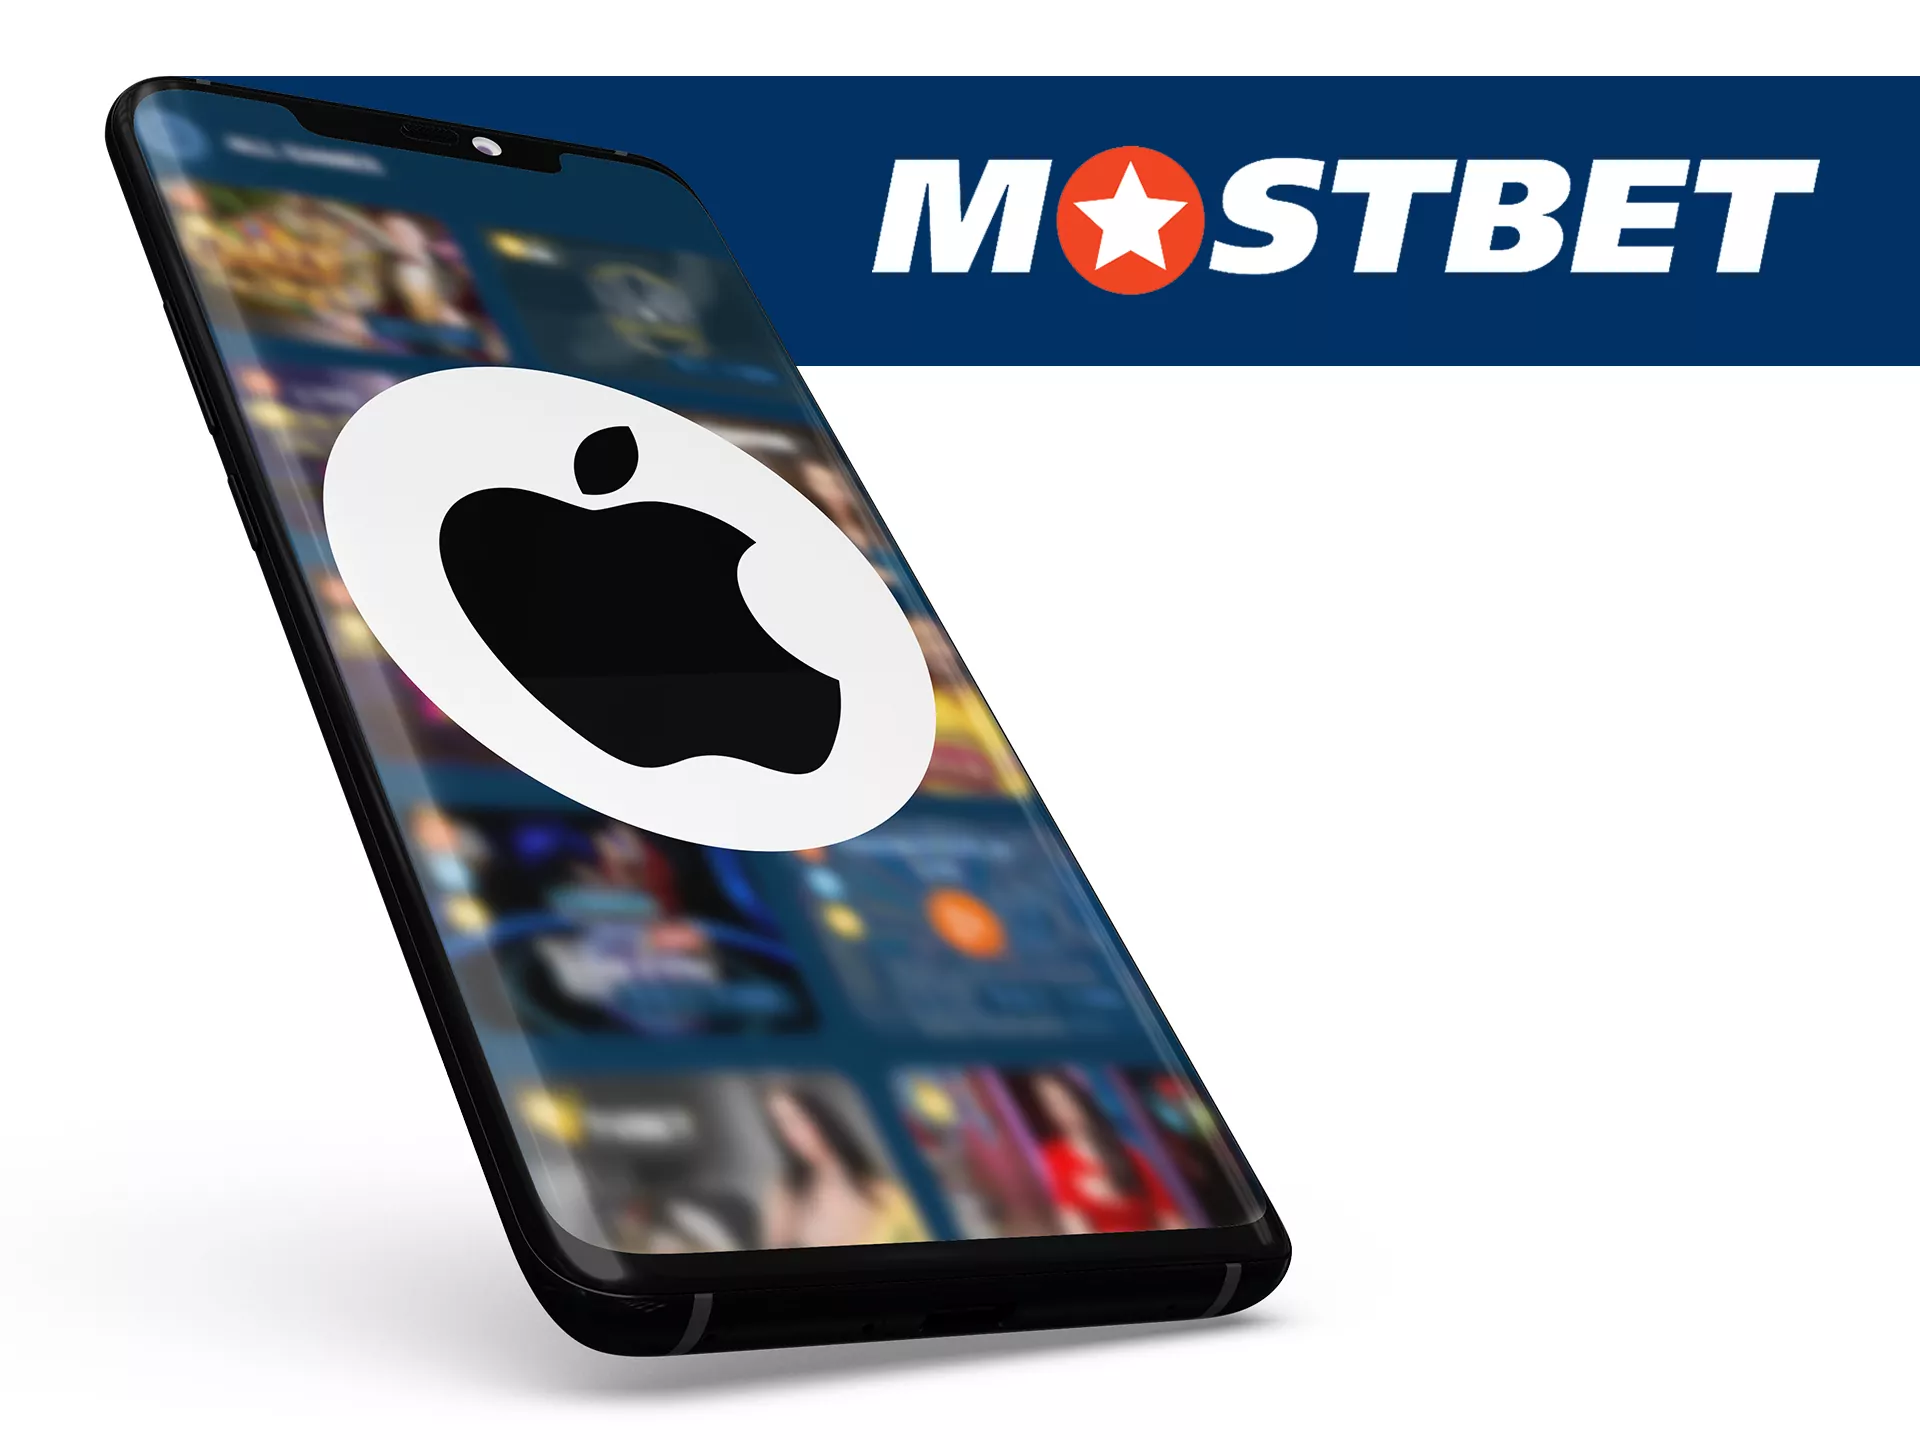 Download Mostbet app on your ios device.